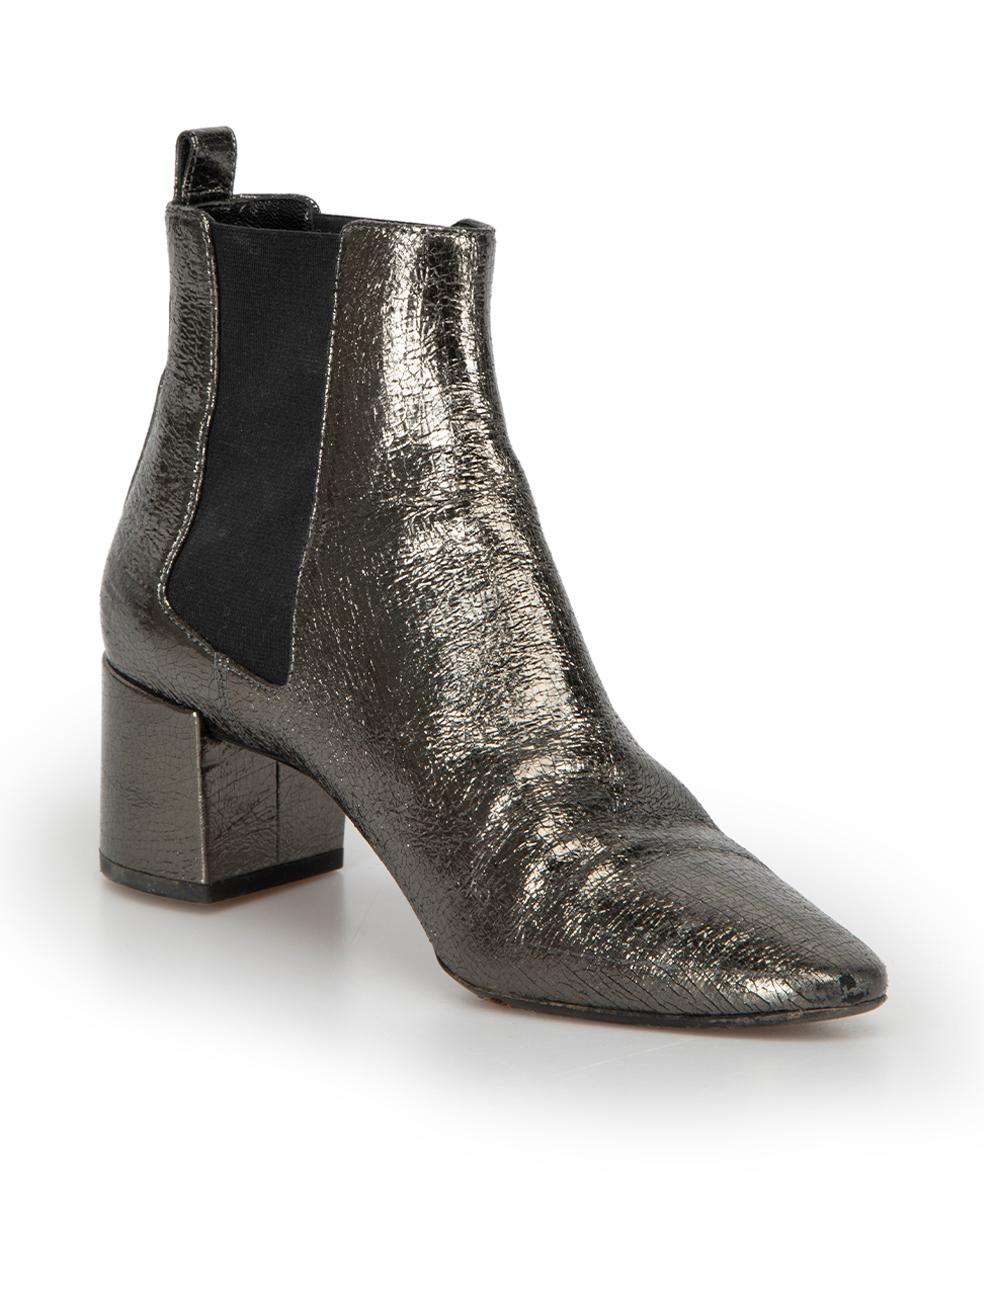 CONDITION is Very good. Minimal wear to boots is evident. Minimal wear to the metallic exterior and the outsole on this used Saint Laurent designer resale item. 



Details


Anthracite

Patent leather

Chelsea boots

Pointed toe

Mid block